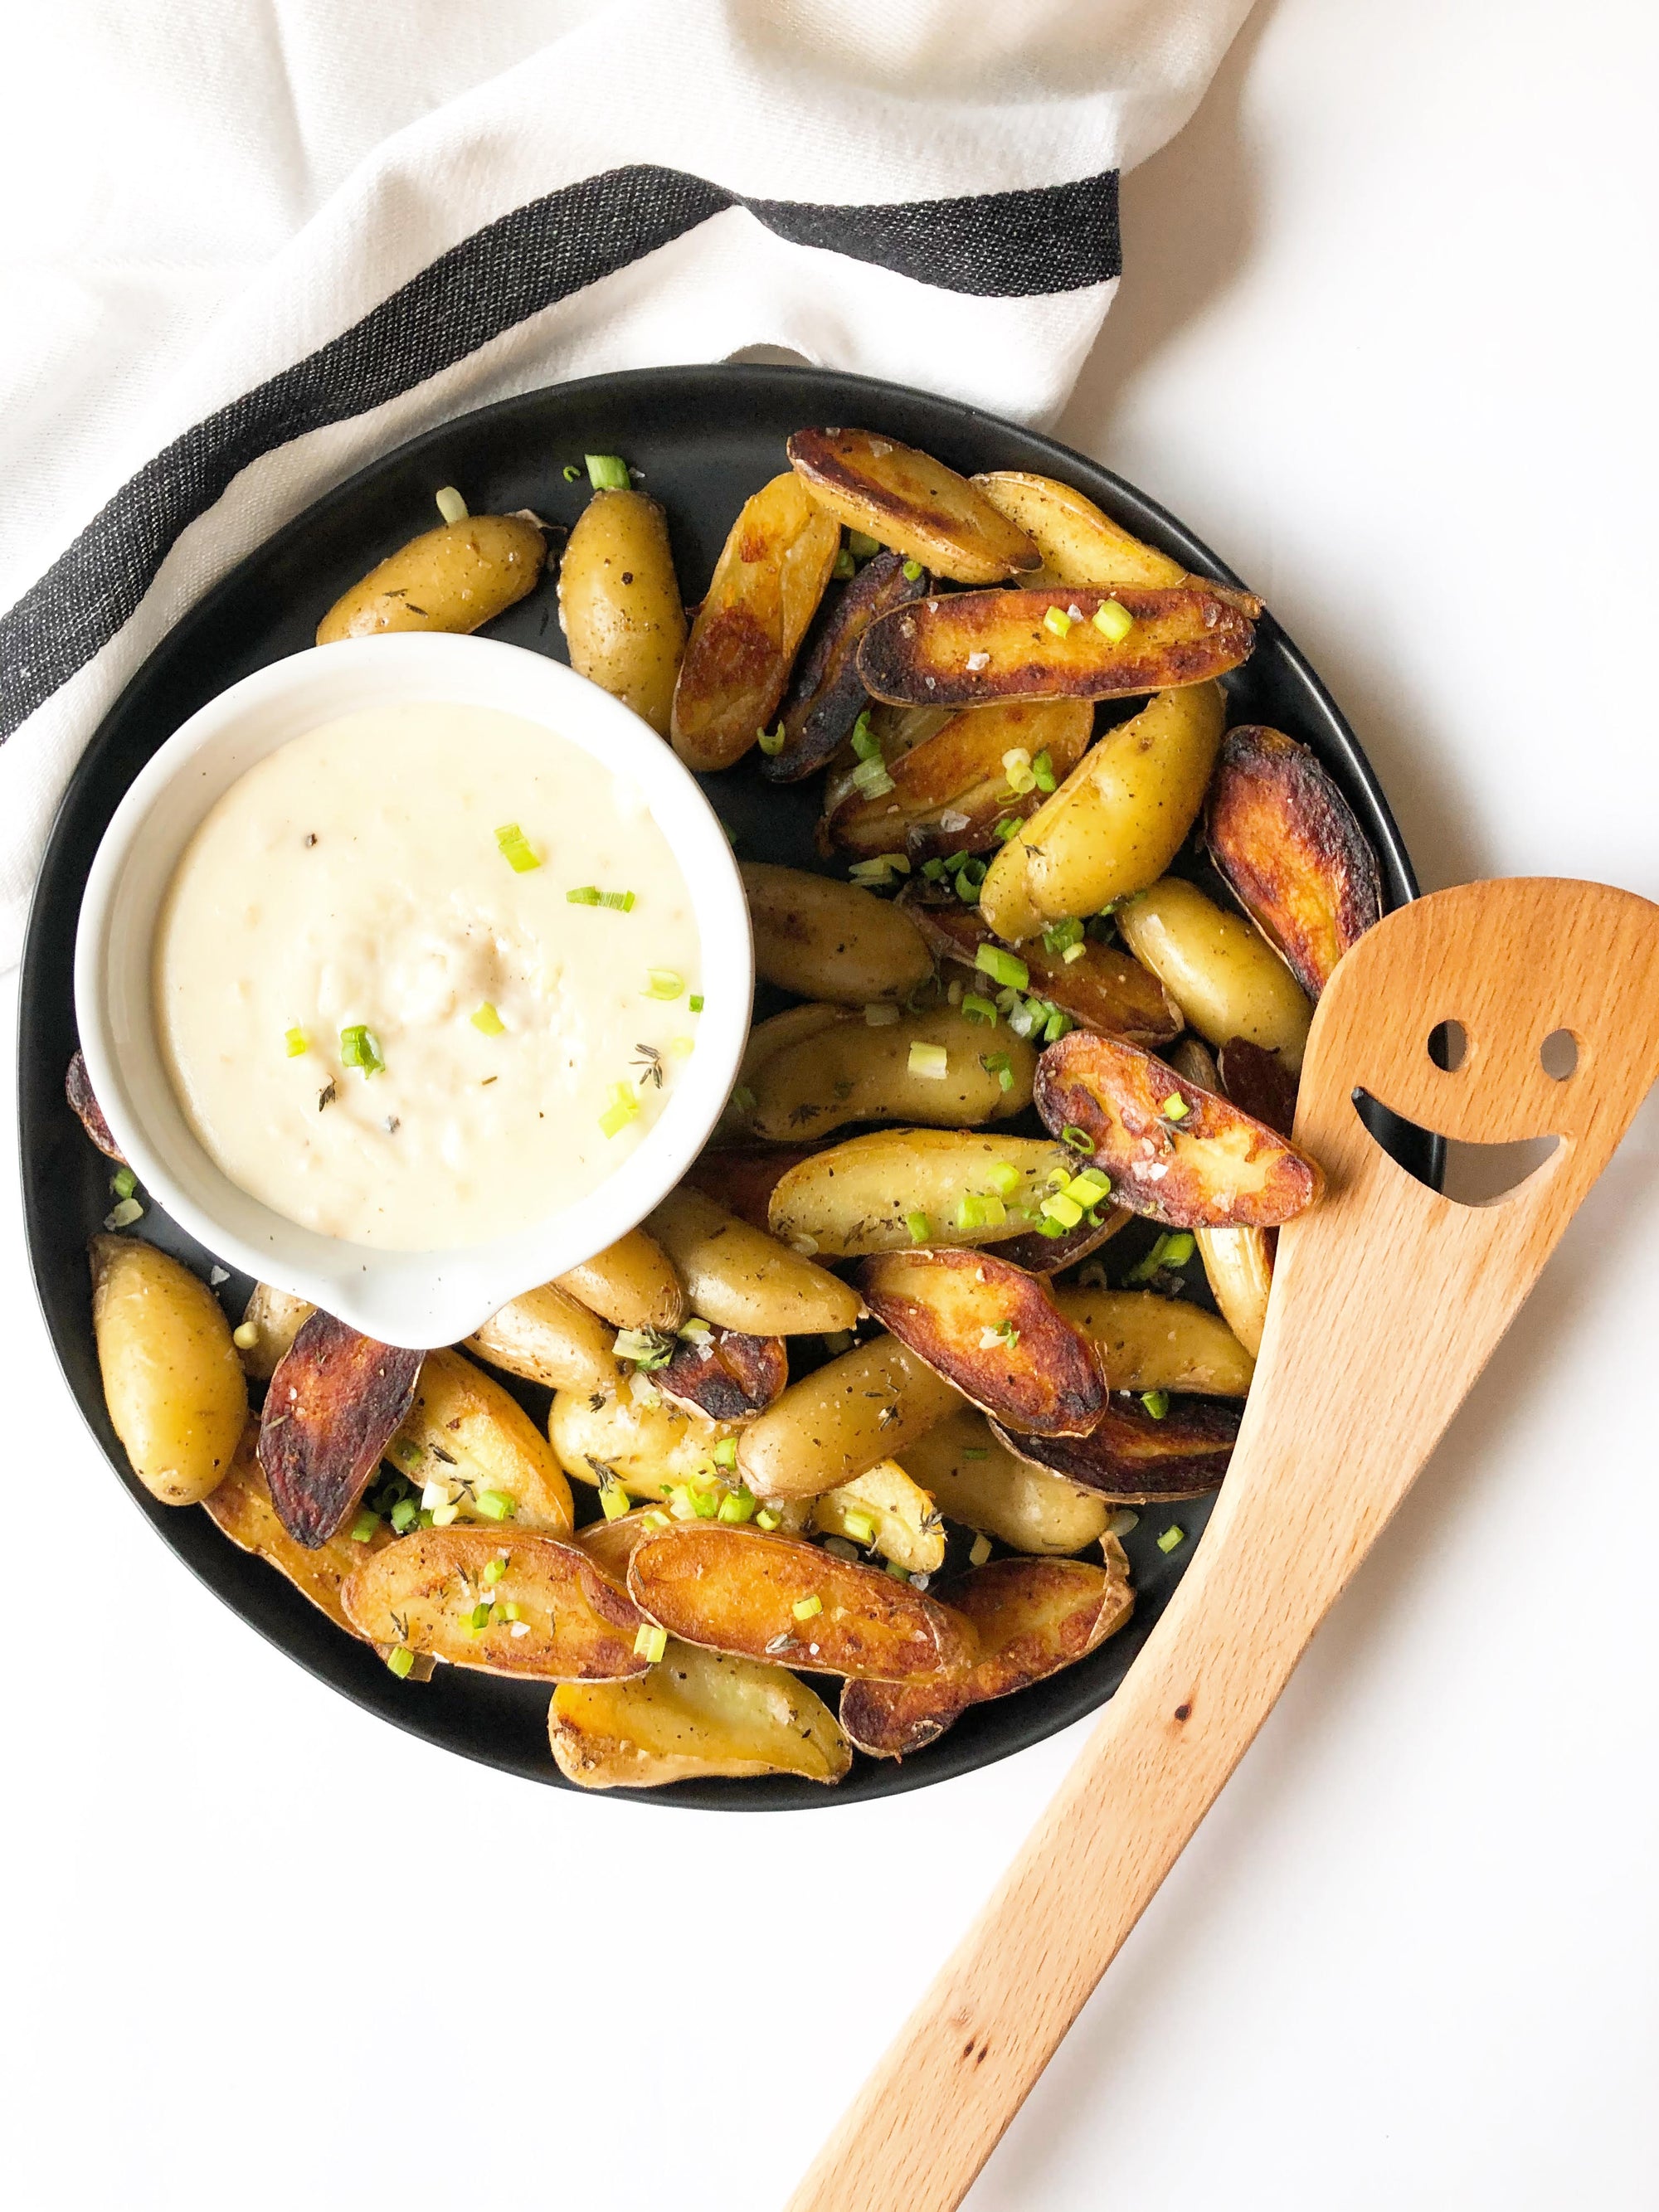 Crispy Fingerling Potatoes with Unexpected Cheddar Dipping Sauce